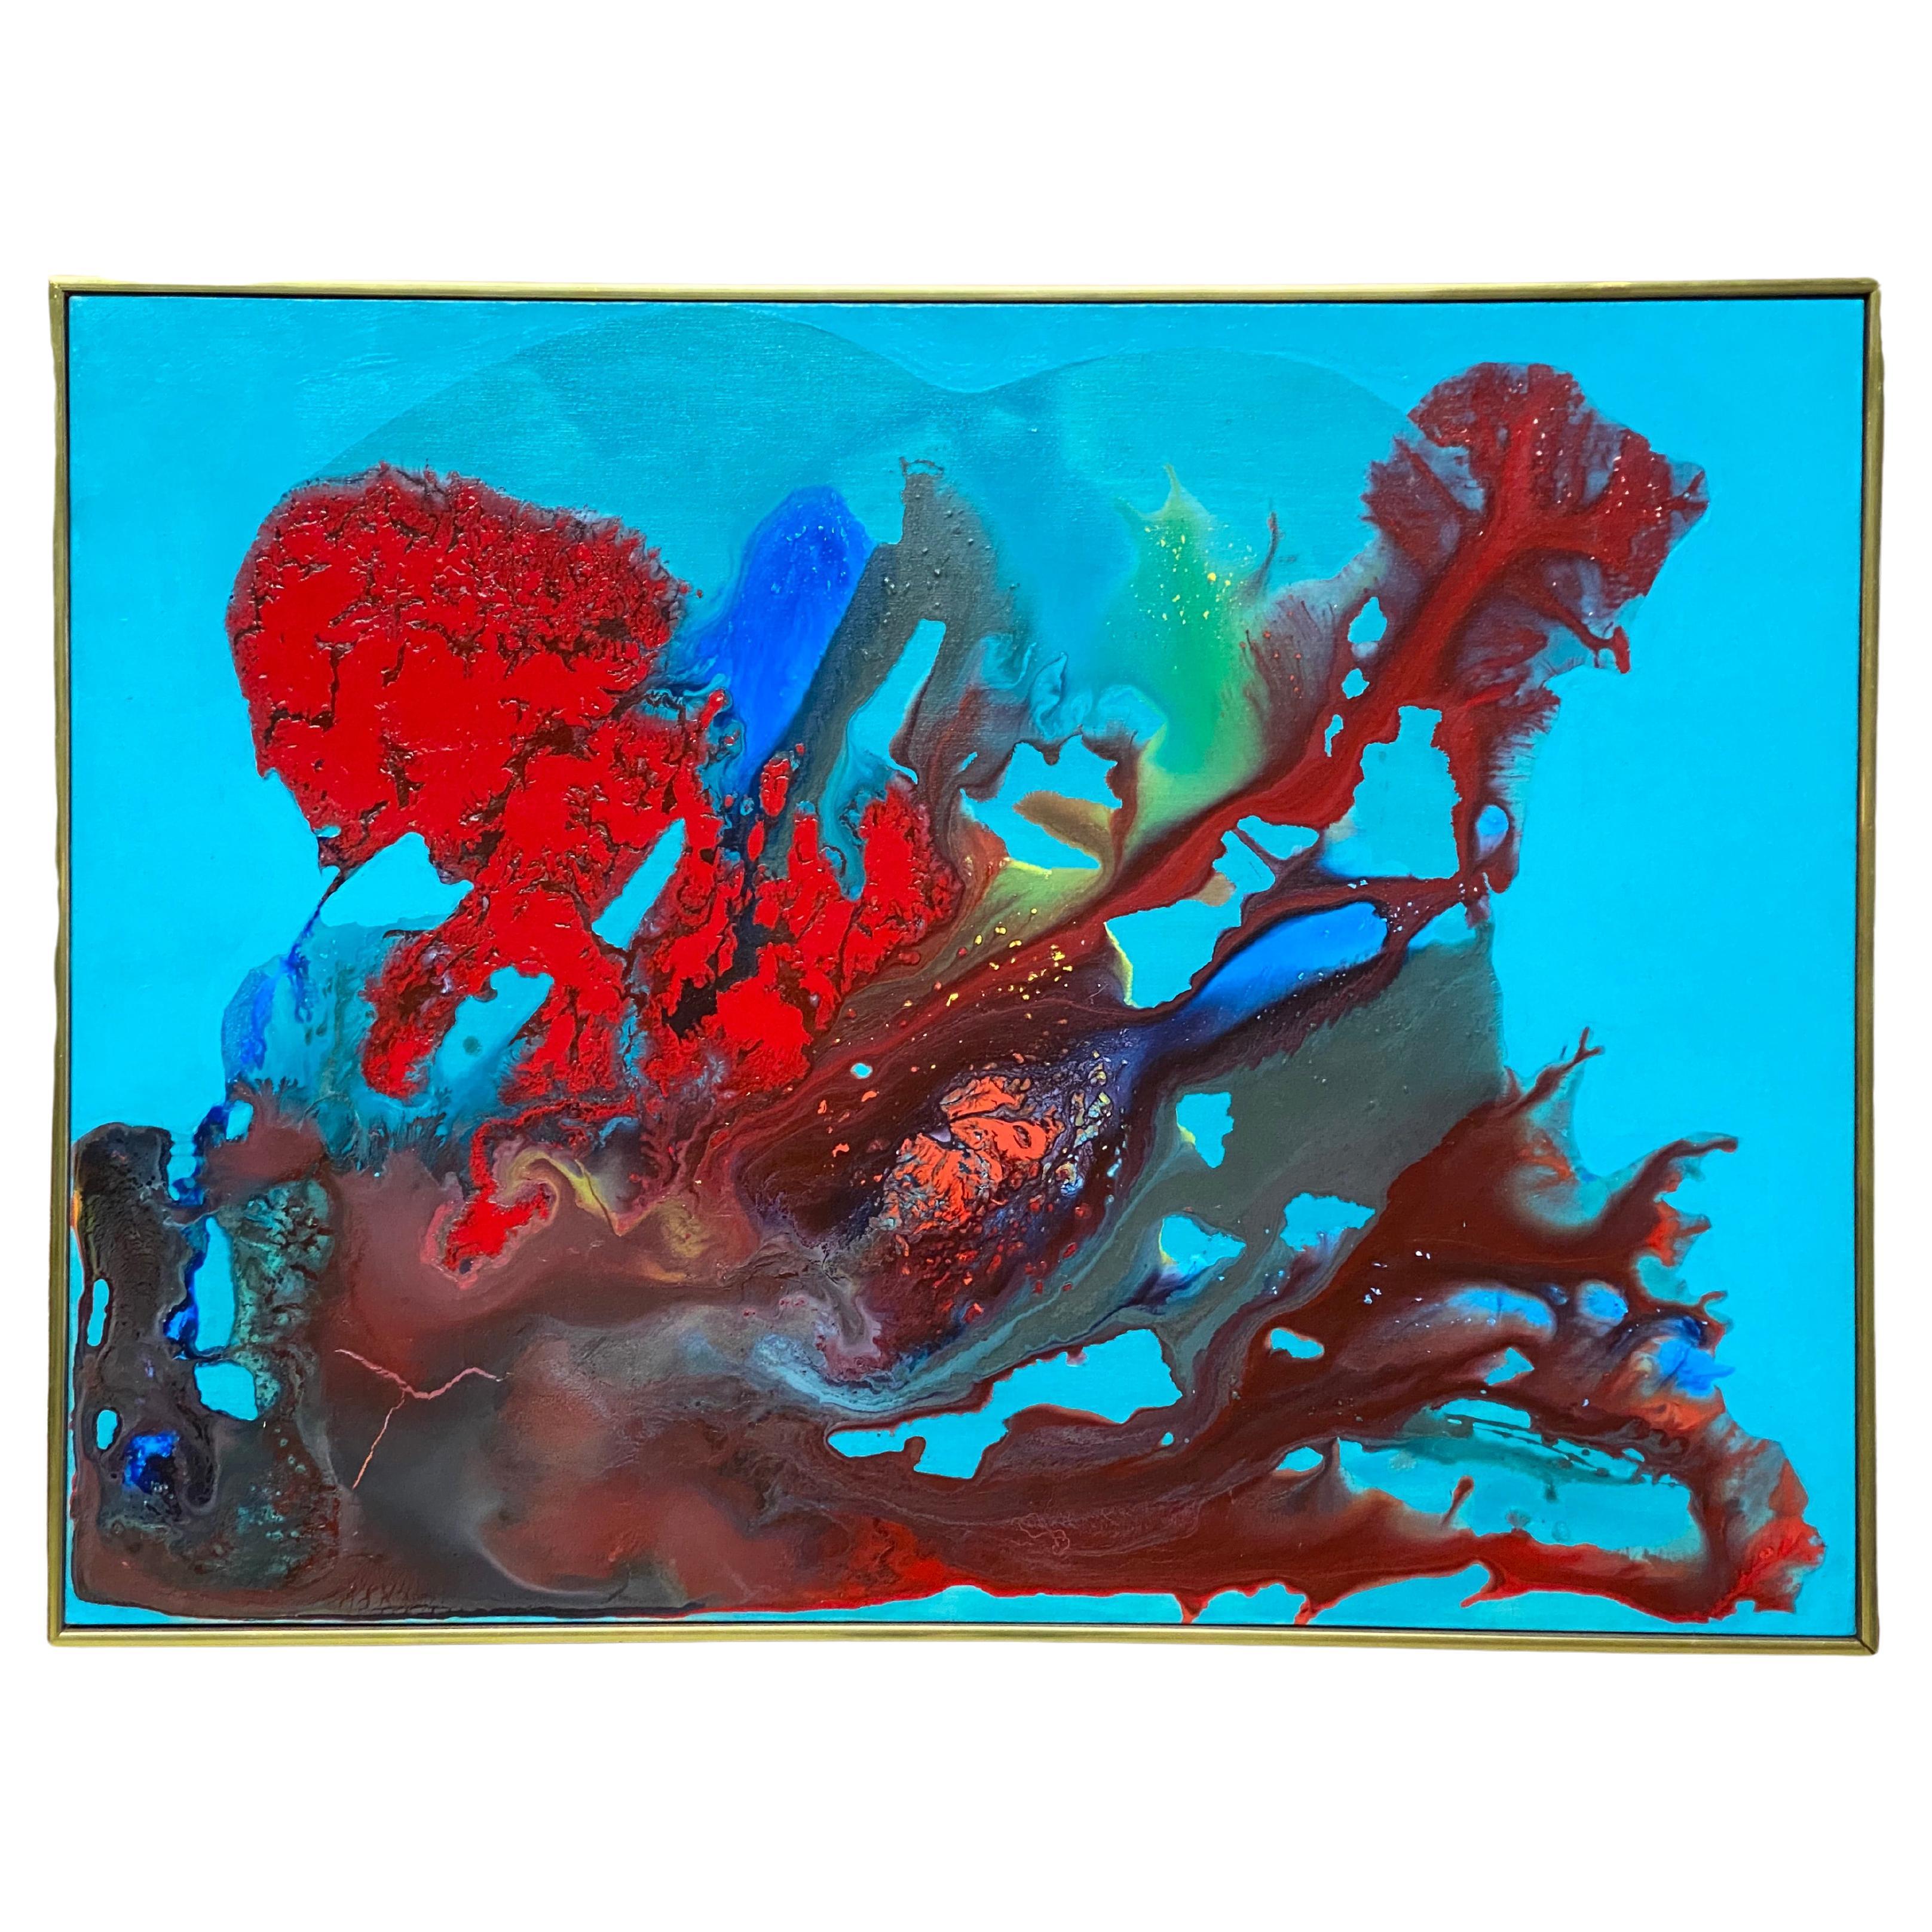 1960s Phillip Schreibman Style Spatter and Blow Psychedelic Painting For Sale